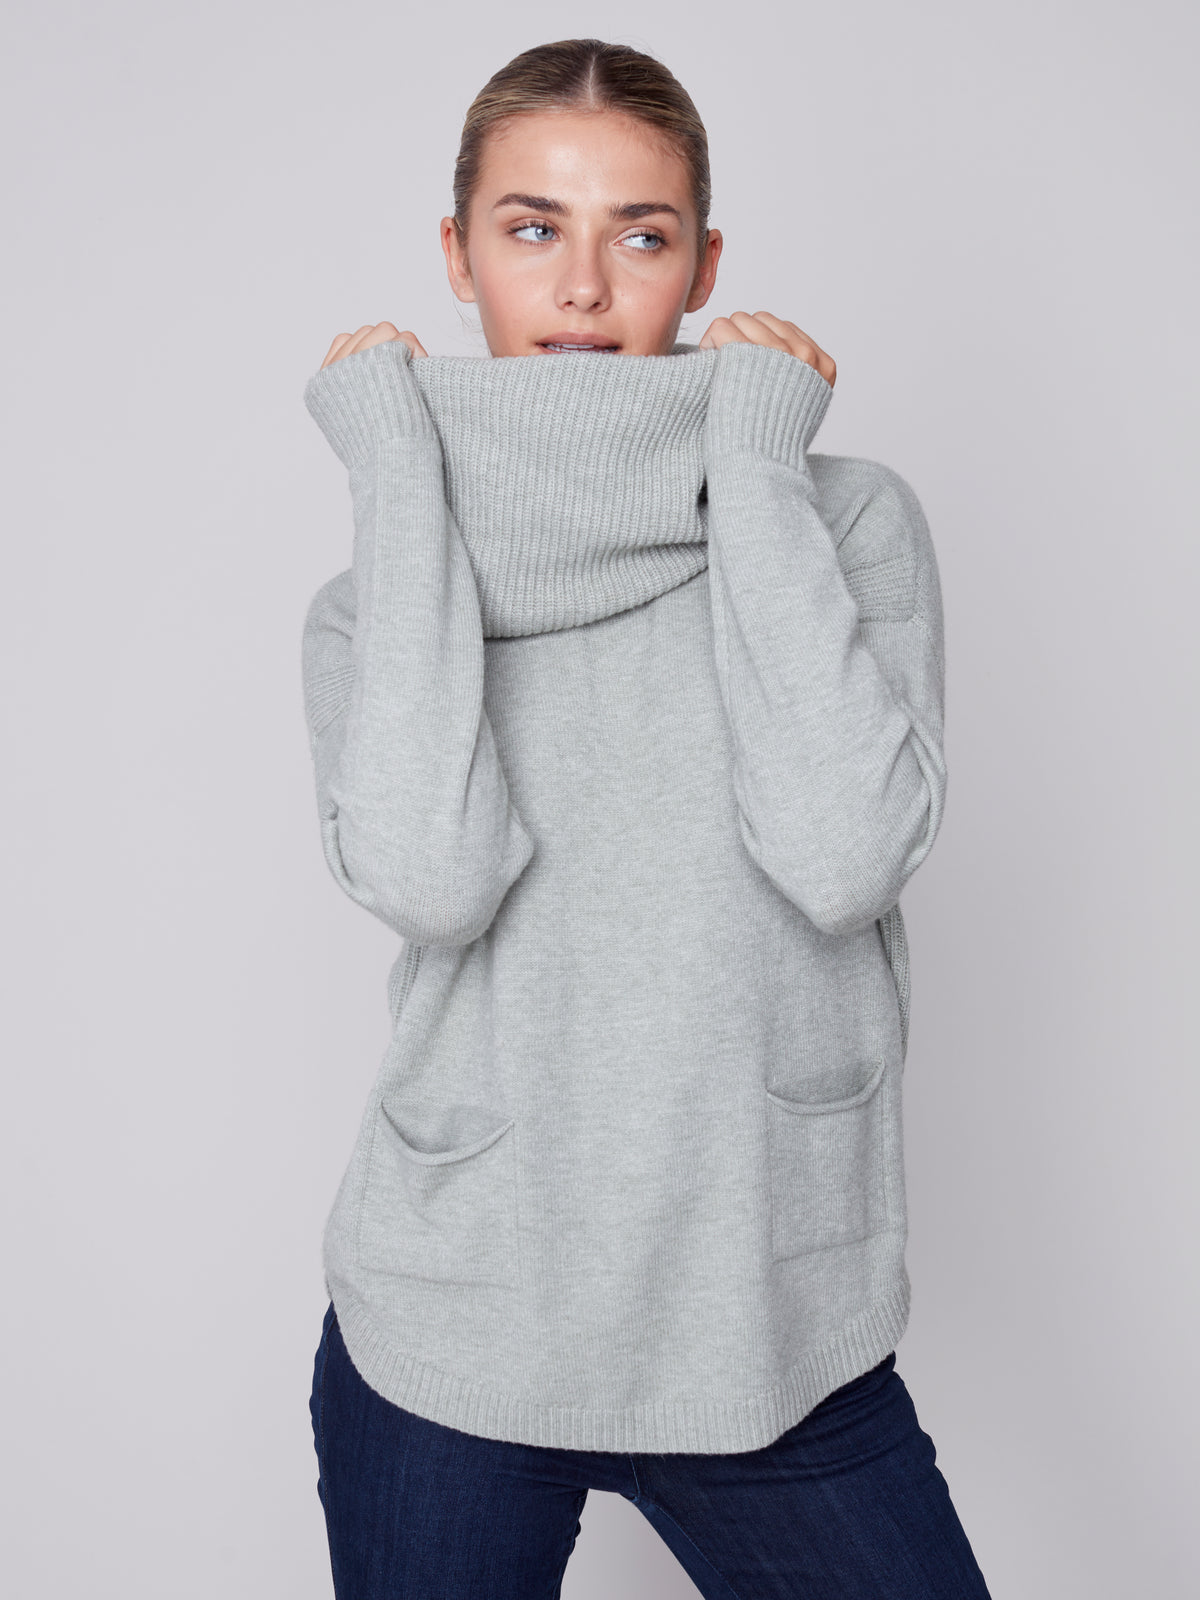 The Jade Sweater in Sage